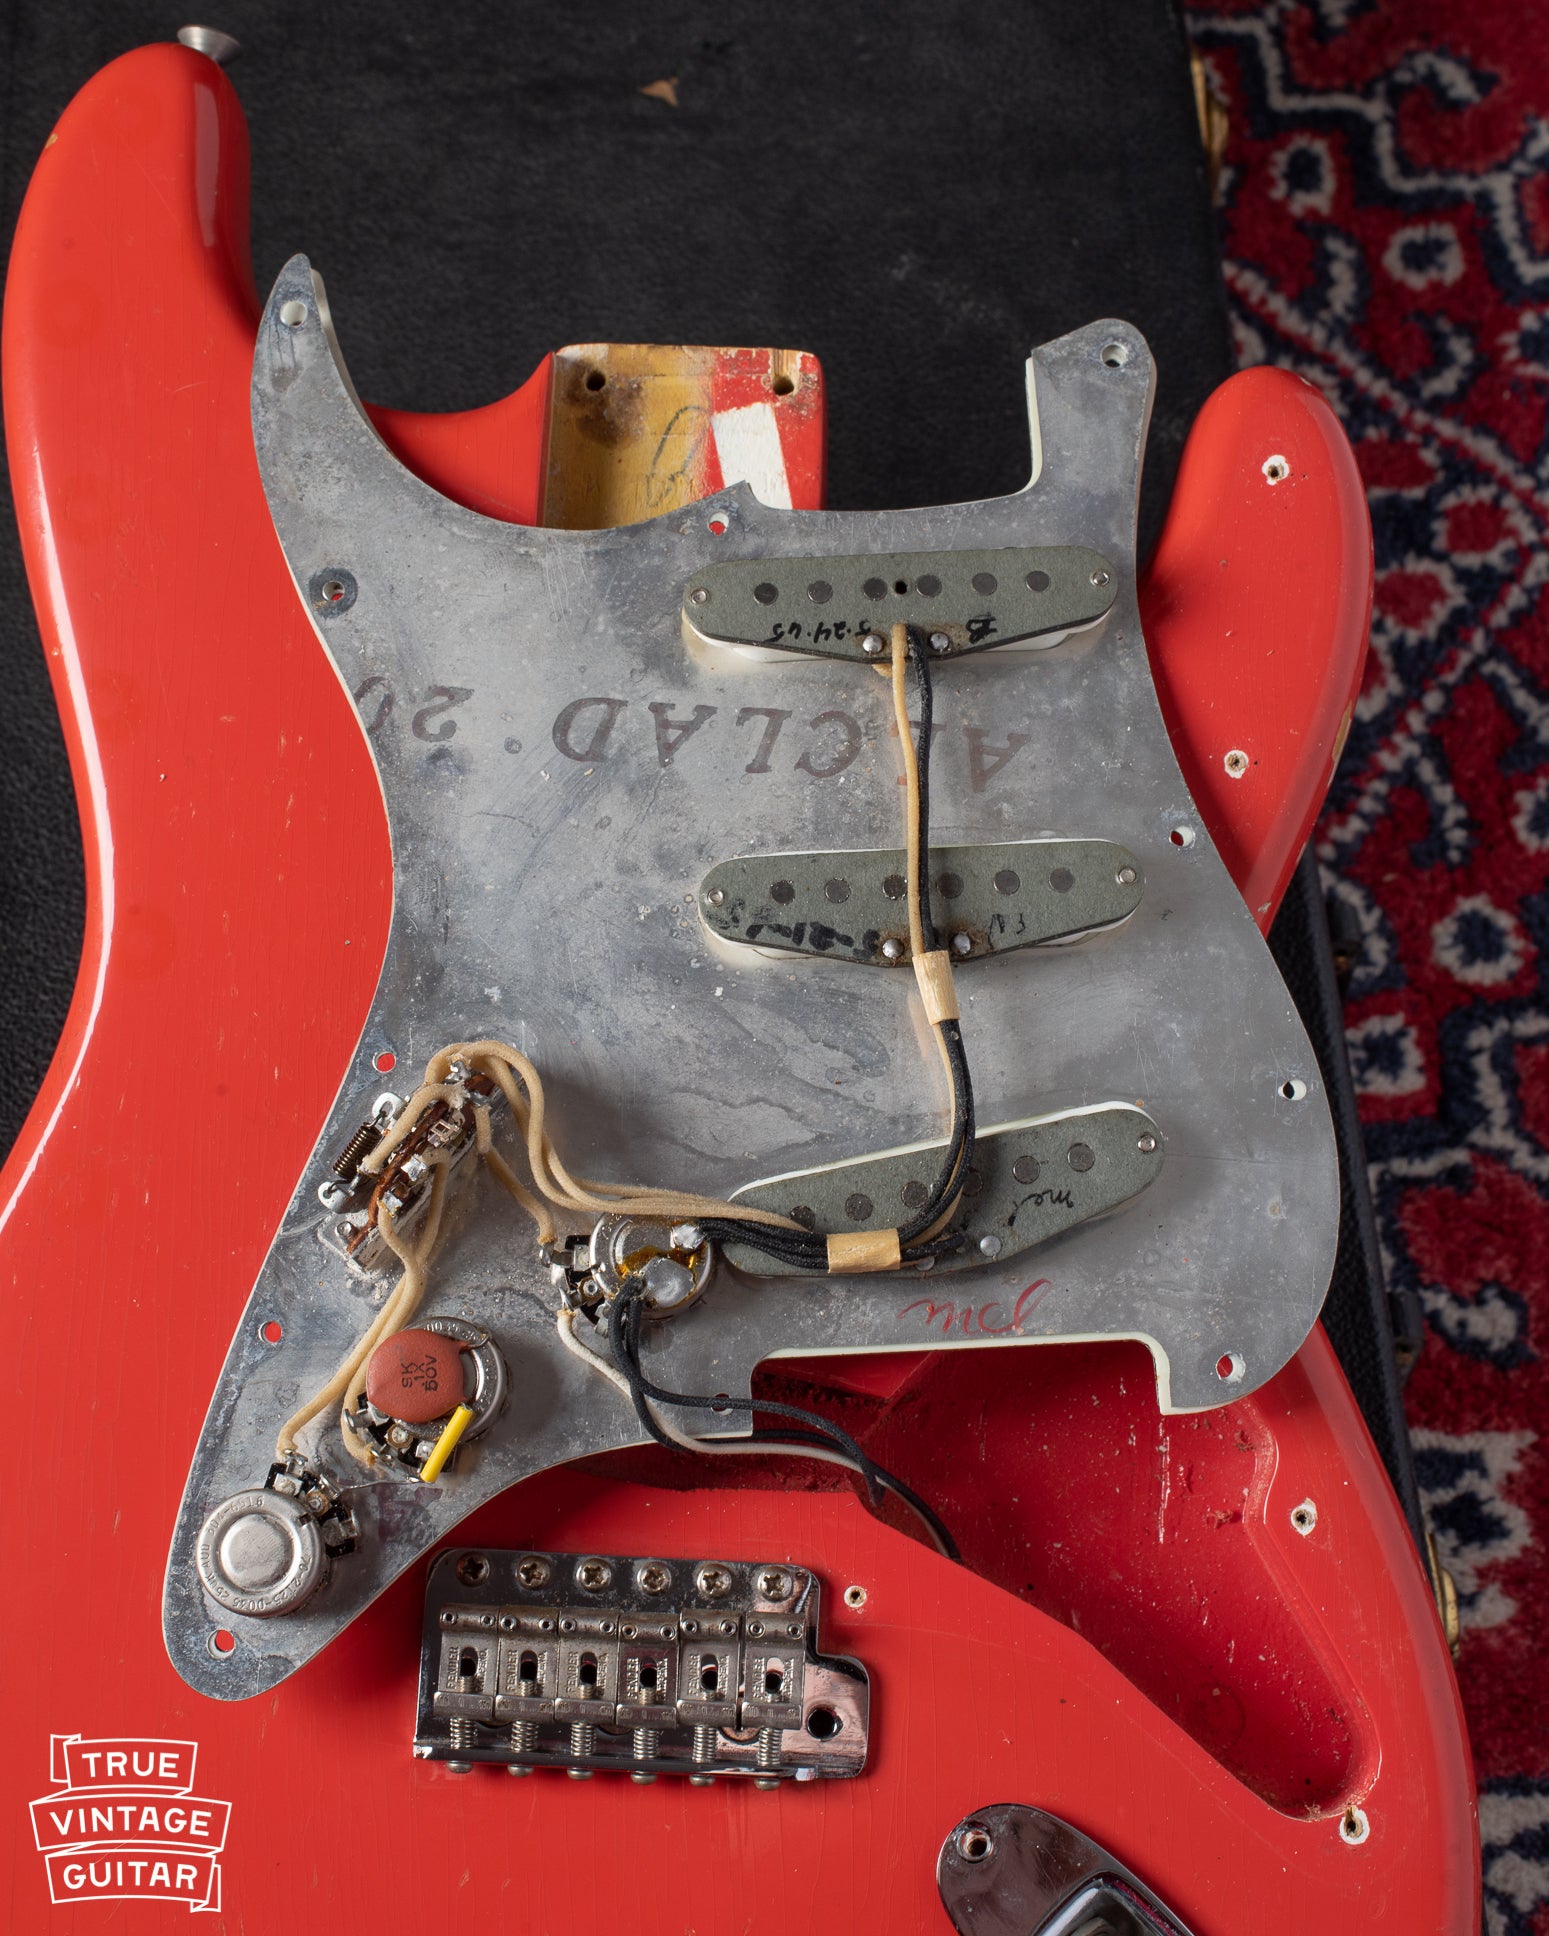 Pickups, potentiometers, switch, and electronics of 1960s Fiesta Red Stratocaster